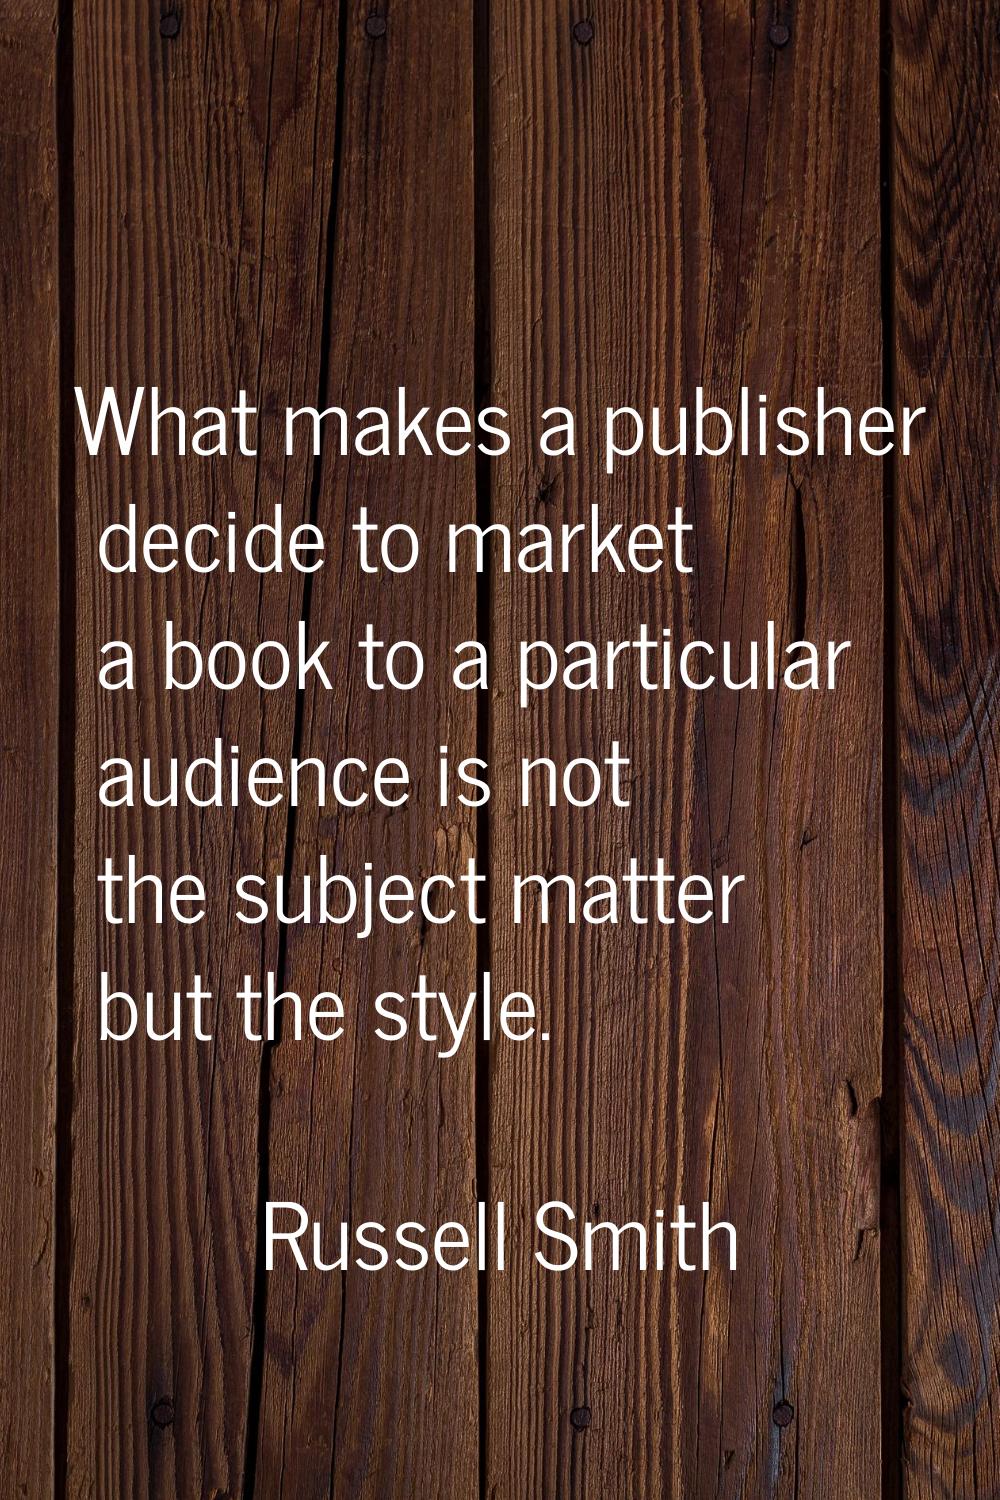 What makes a publisher decide to market a book to a particular audience is not the subject matter b